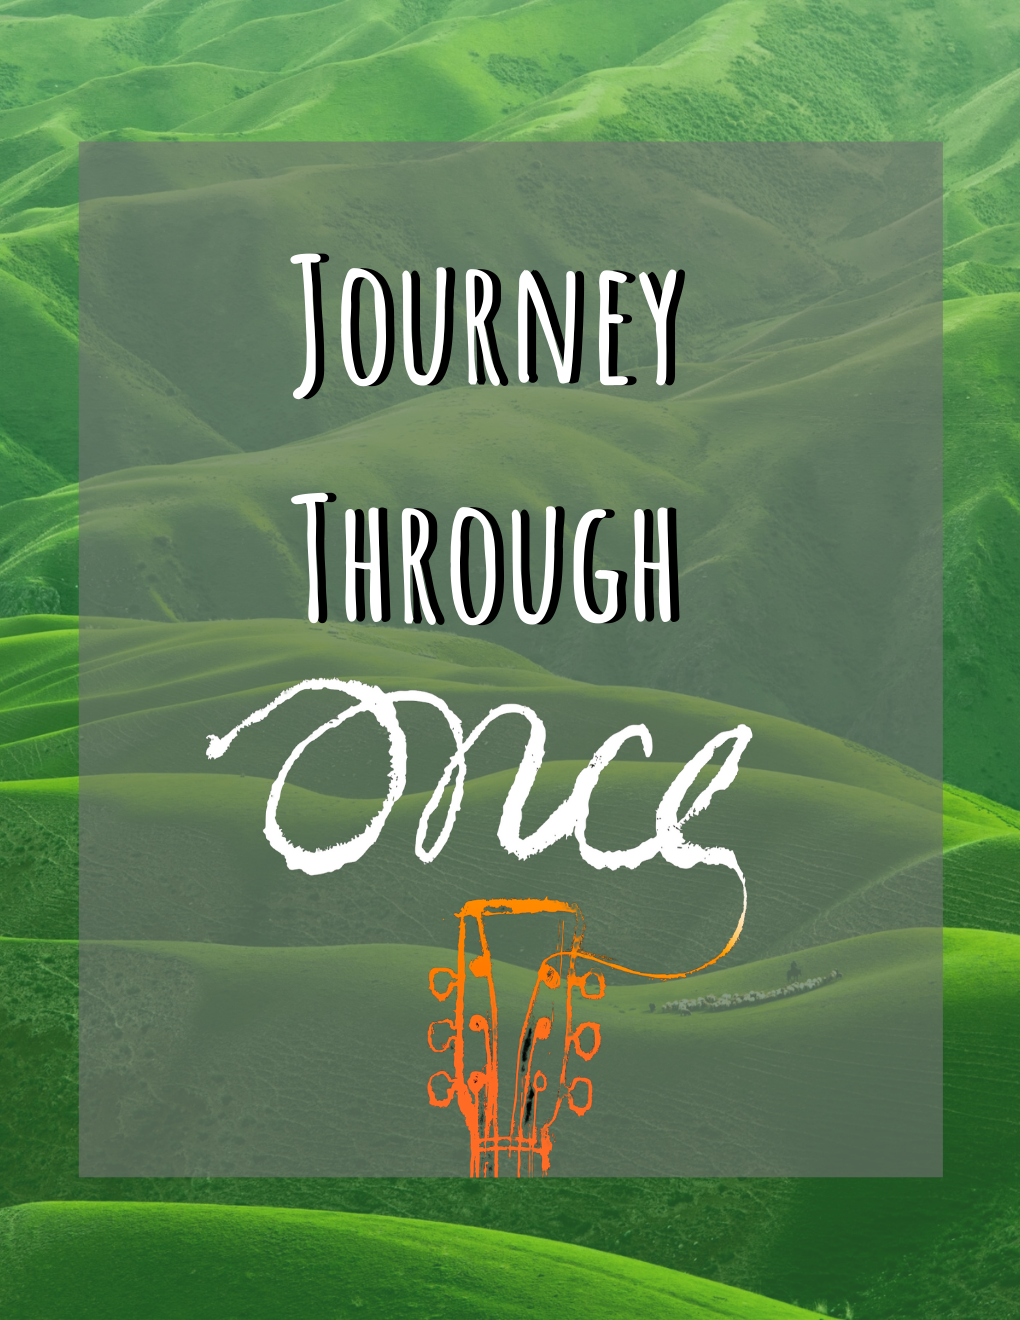 A Journey Through Once